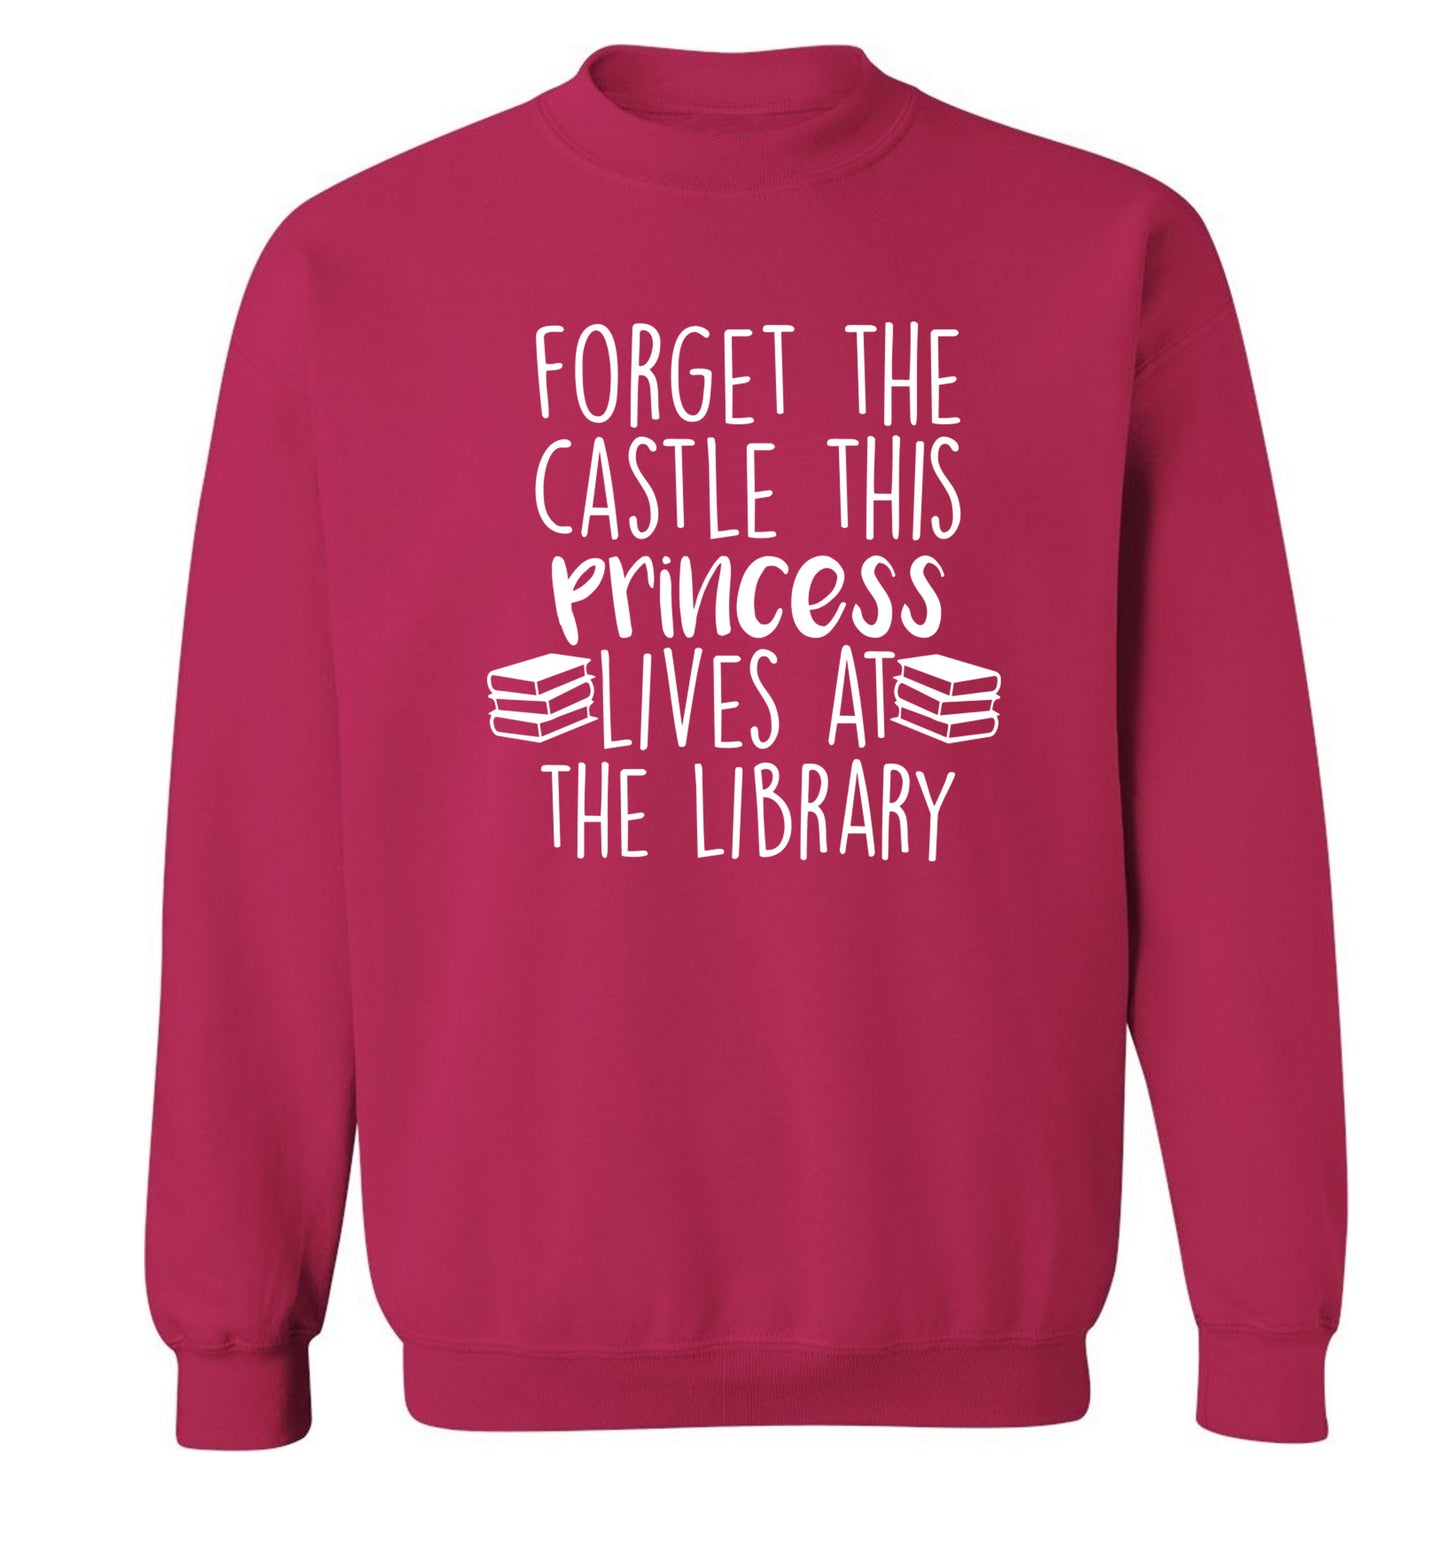 Forget the castle this princess lives at the library Adult's unisex pink Sweater 2XL